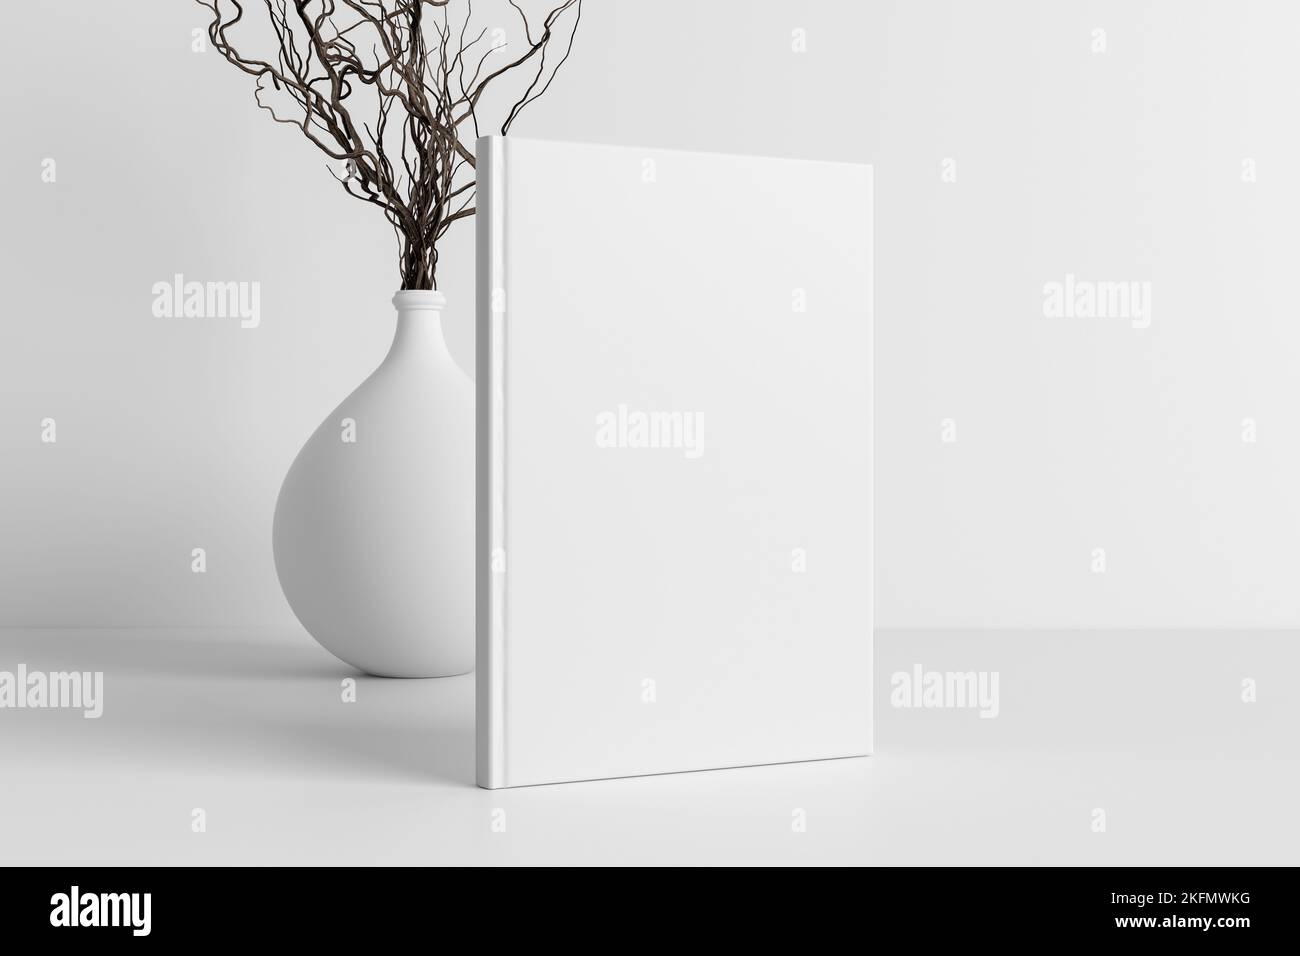 Vertical book cover mock up standing on a white desk with white wall background Stock Photo